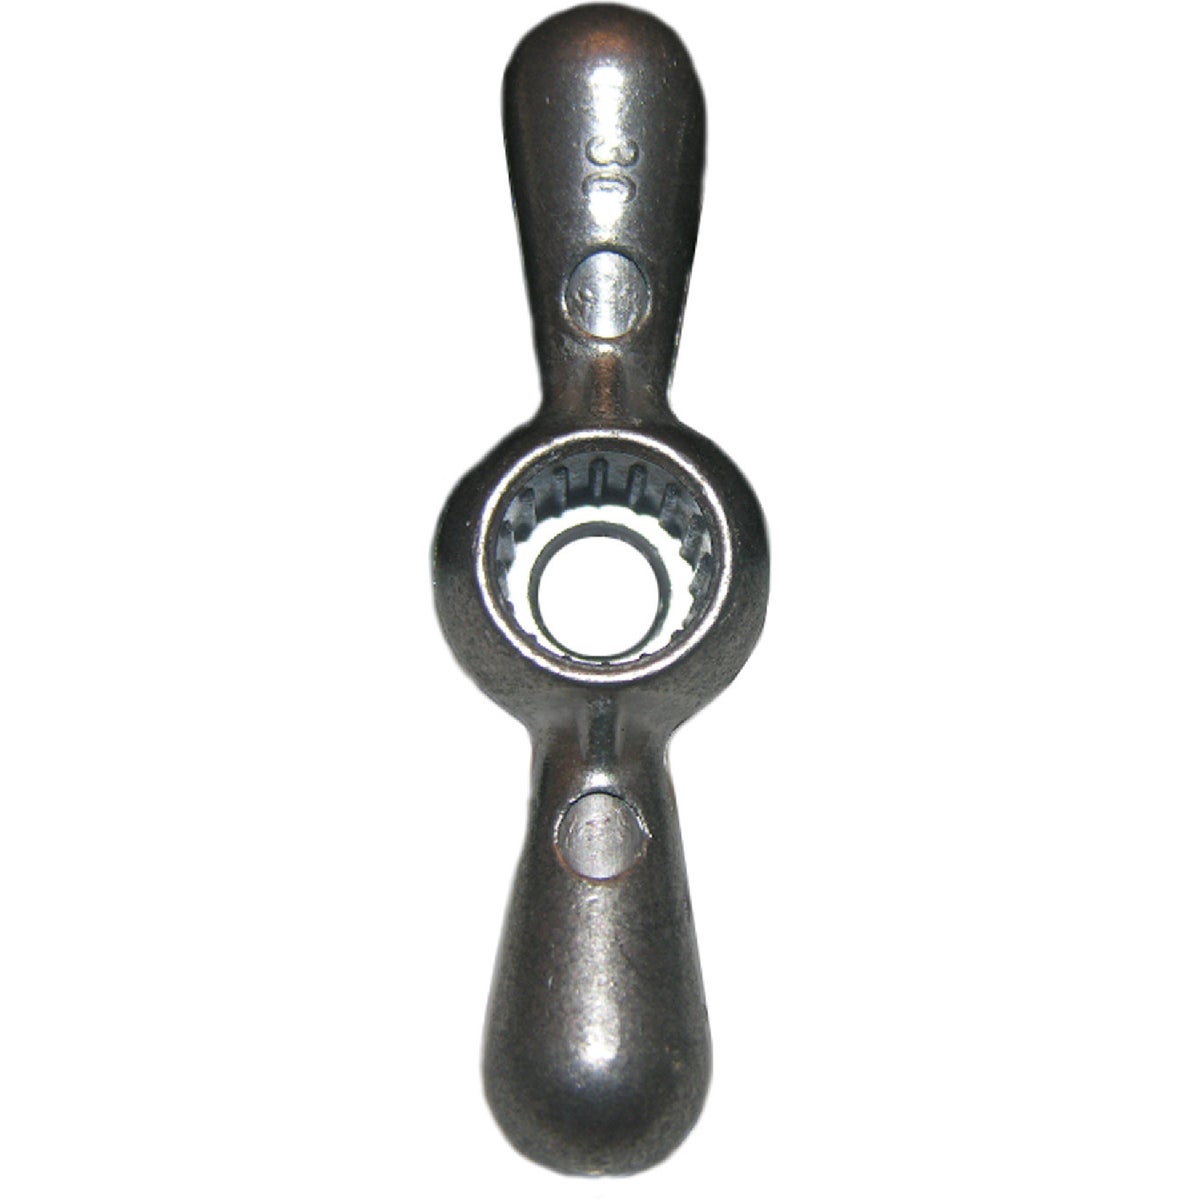 Lasco Sillcock Tee Handle for 16 Round Splined Stem